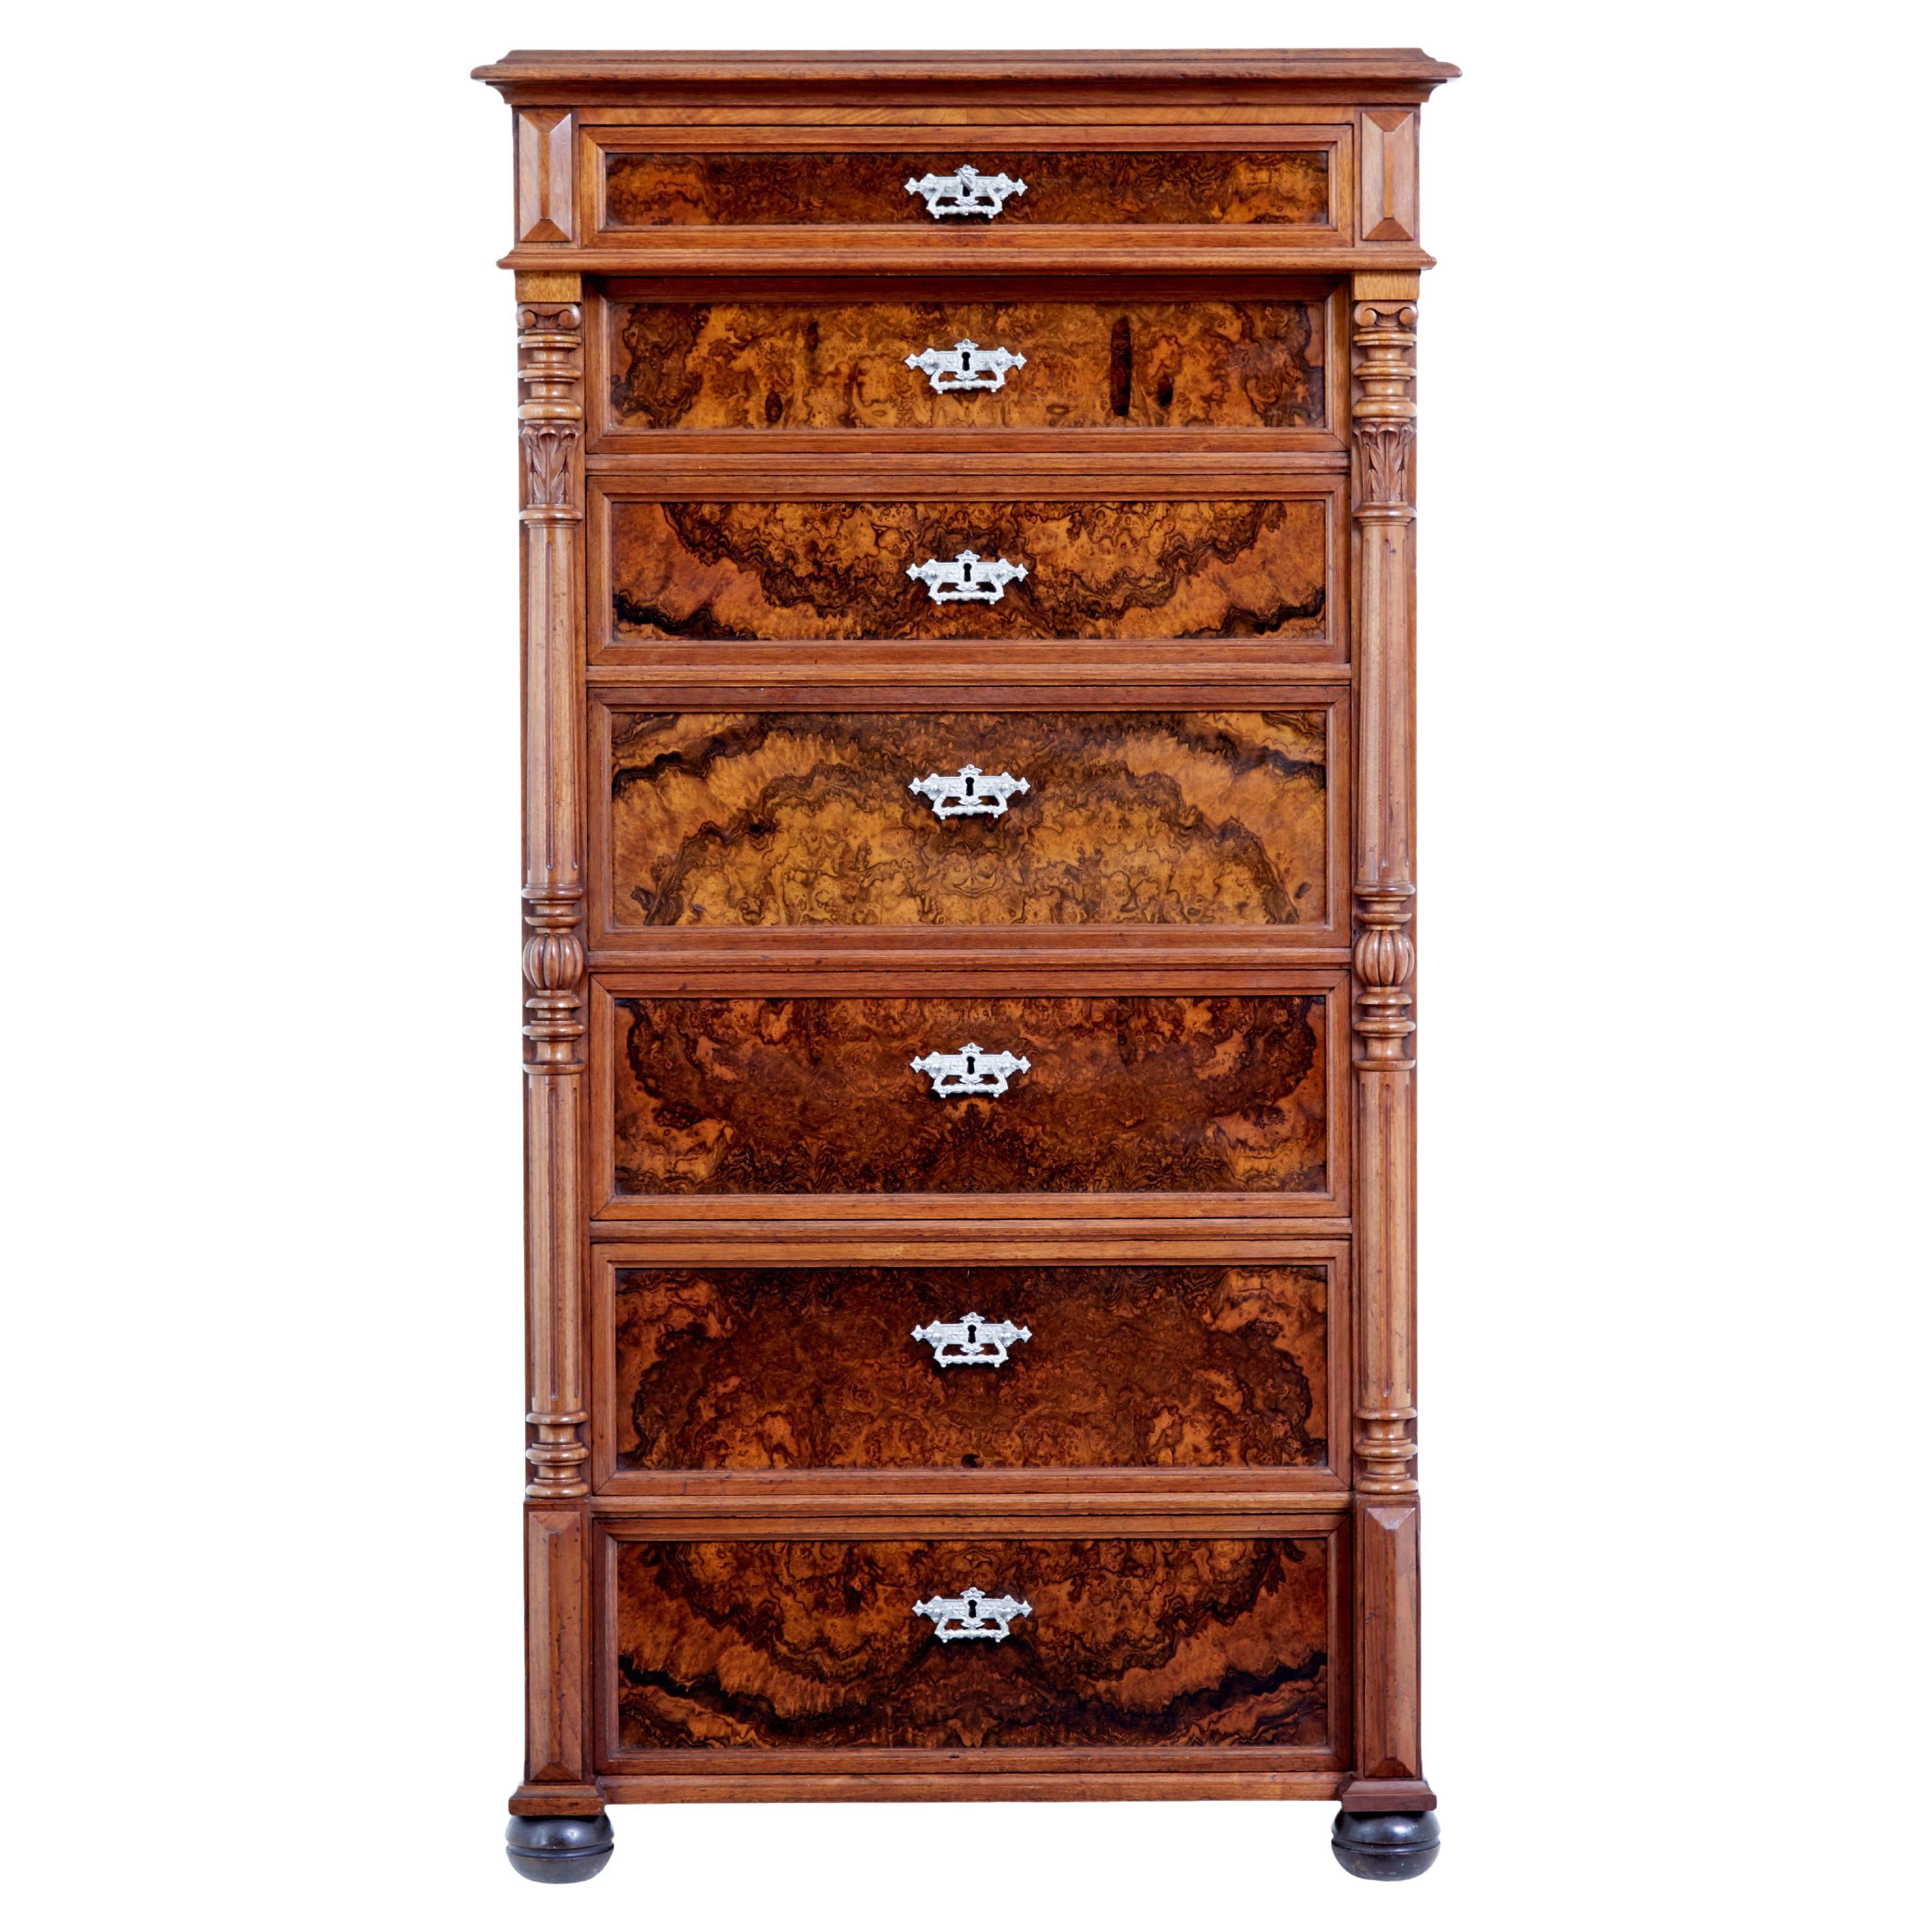 19th century burr walnut secretaire tall chest of drawers For Sale